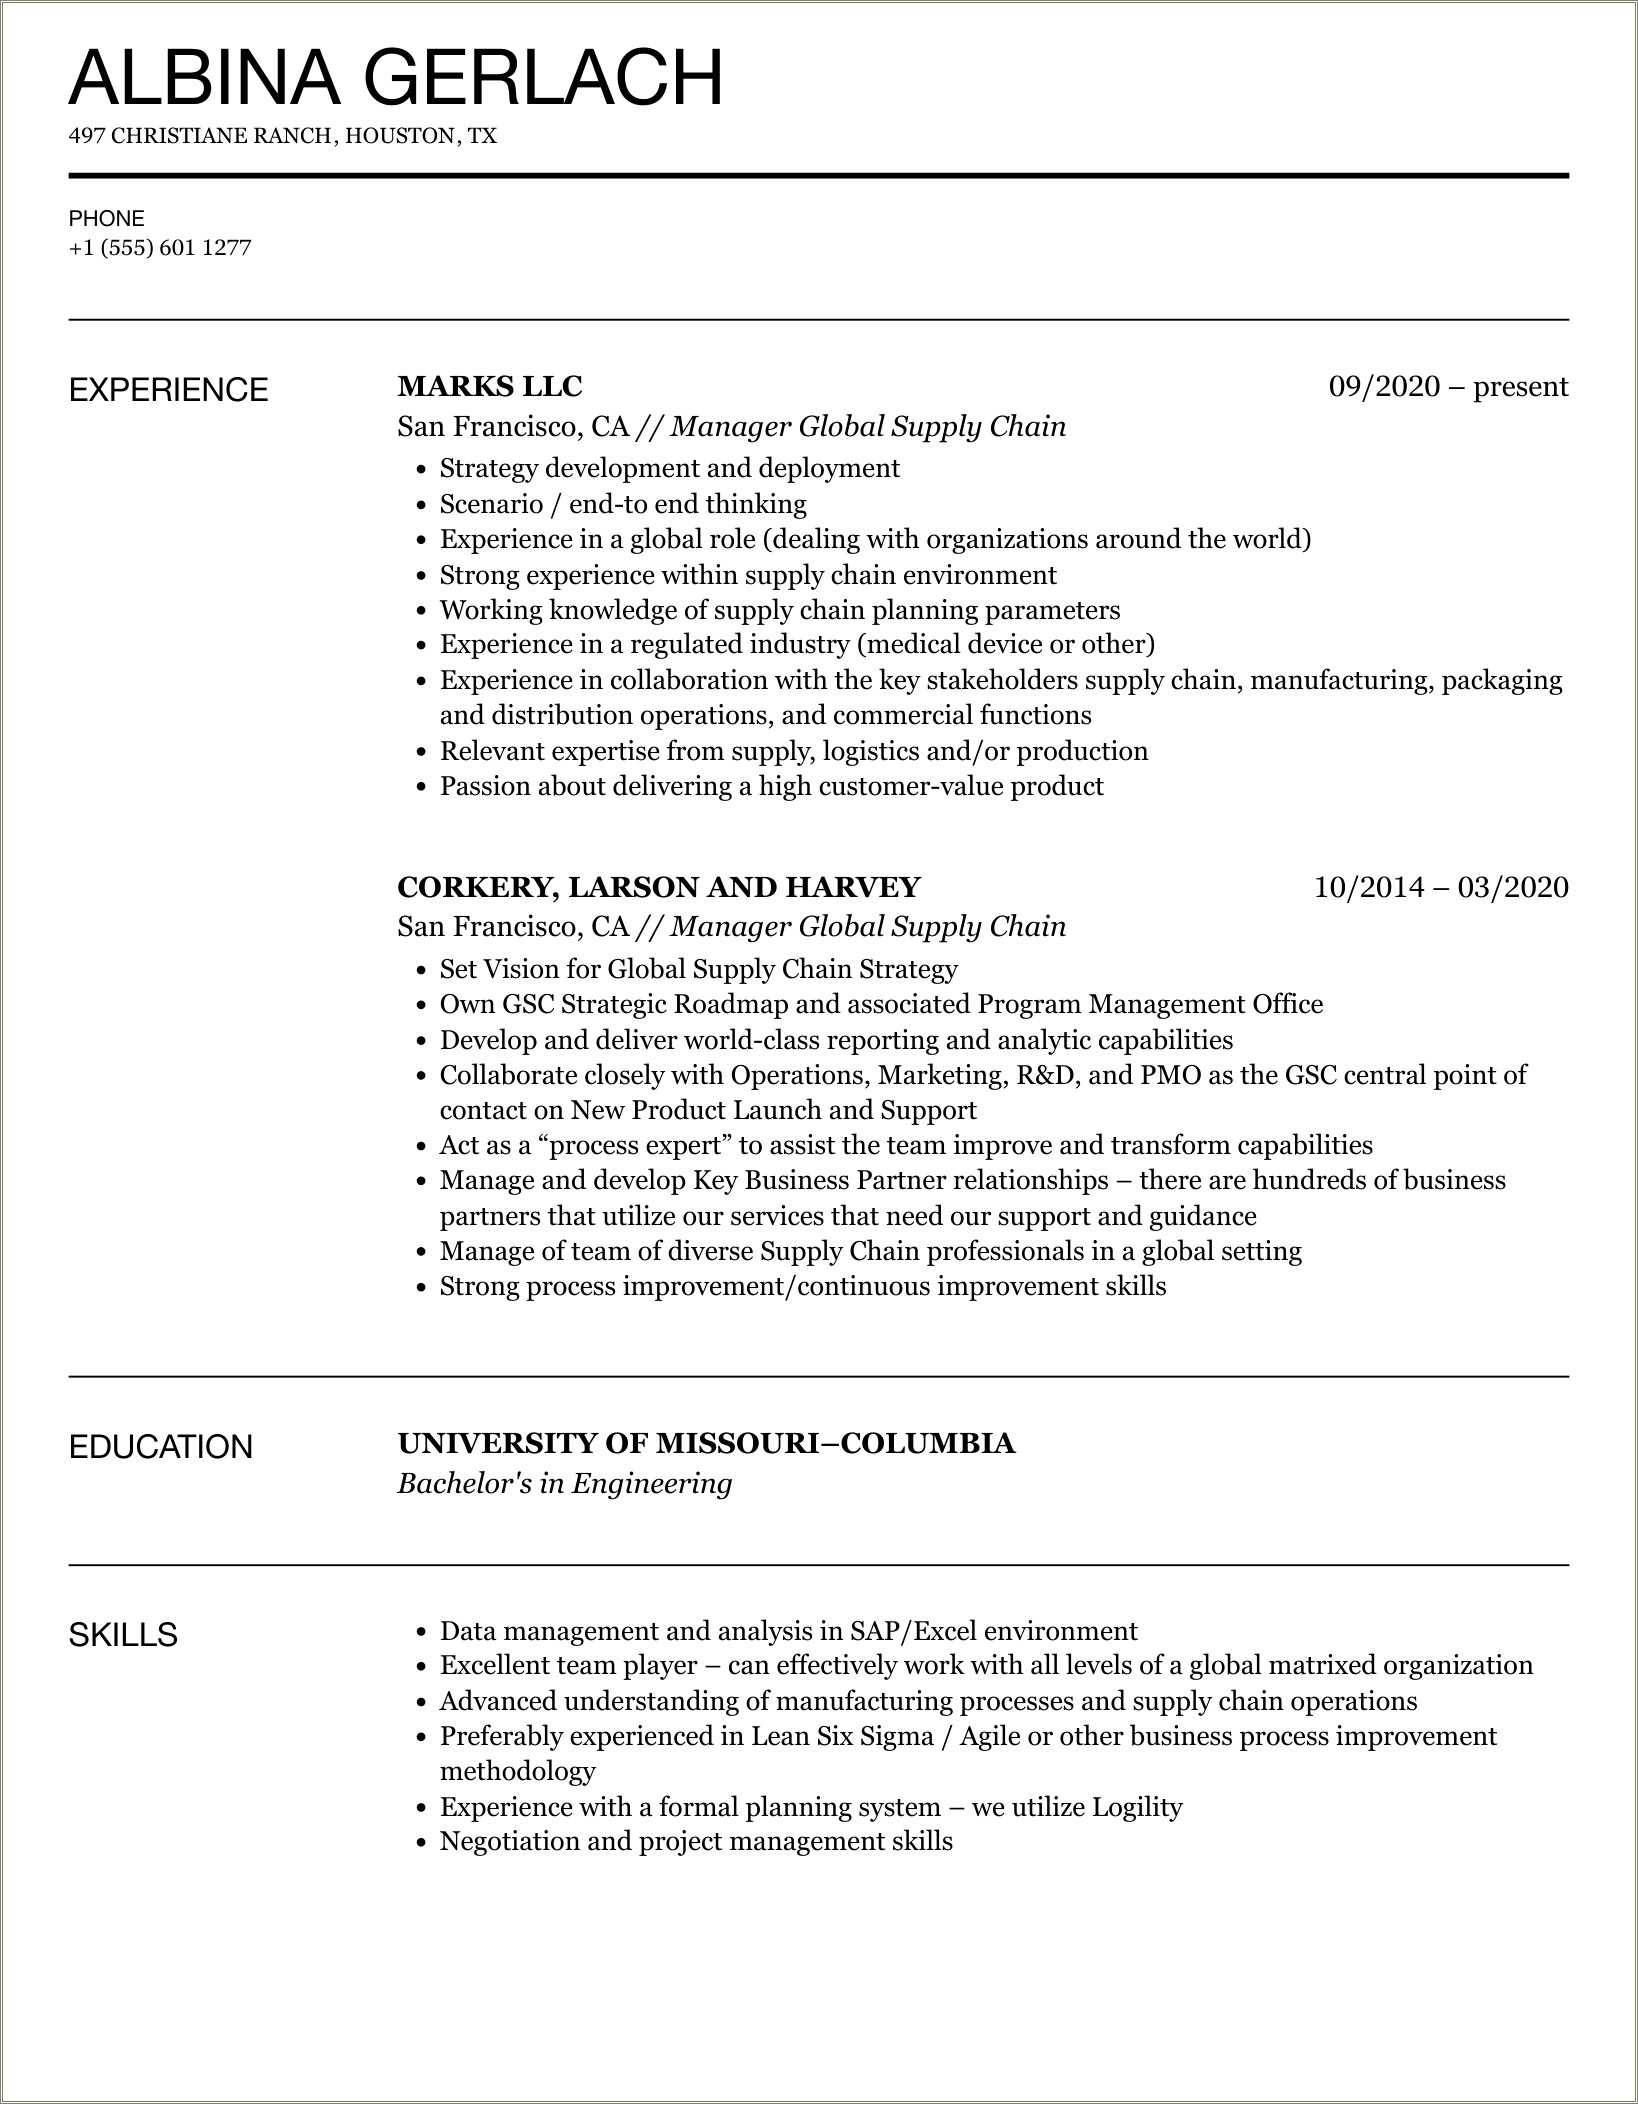 Global Supply Manager Apple Resume Examples